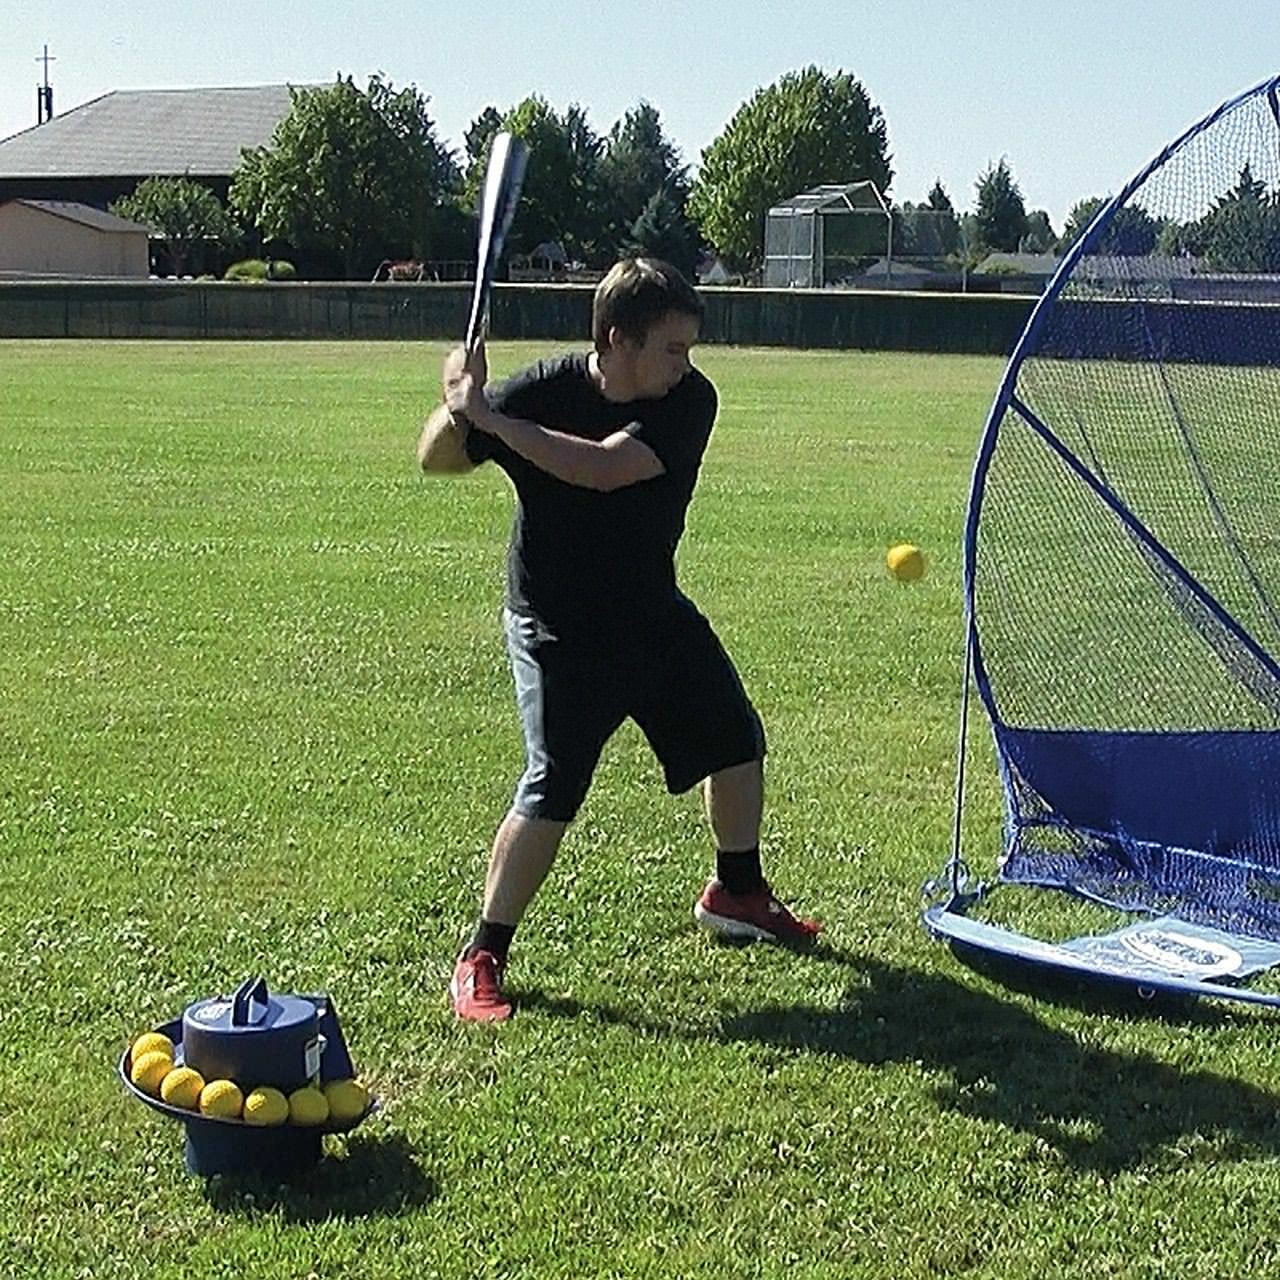 Jugs Toss Soft Toss Machine for Baseball & Softball Used In Practice